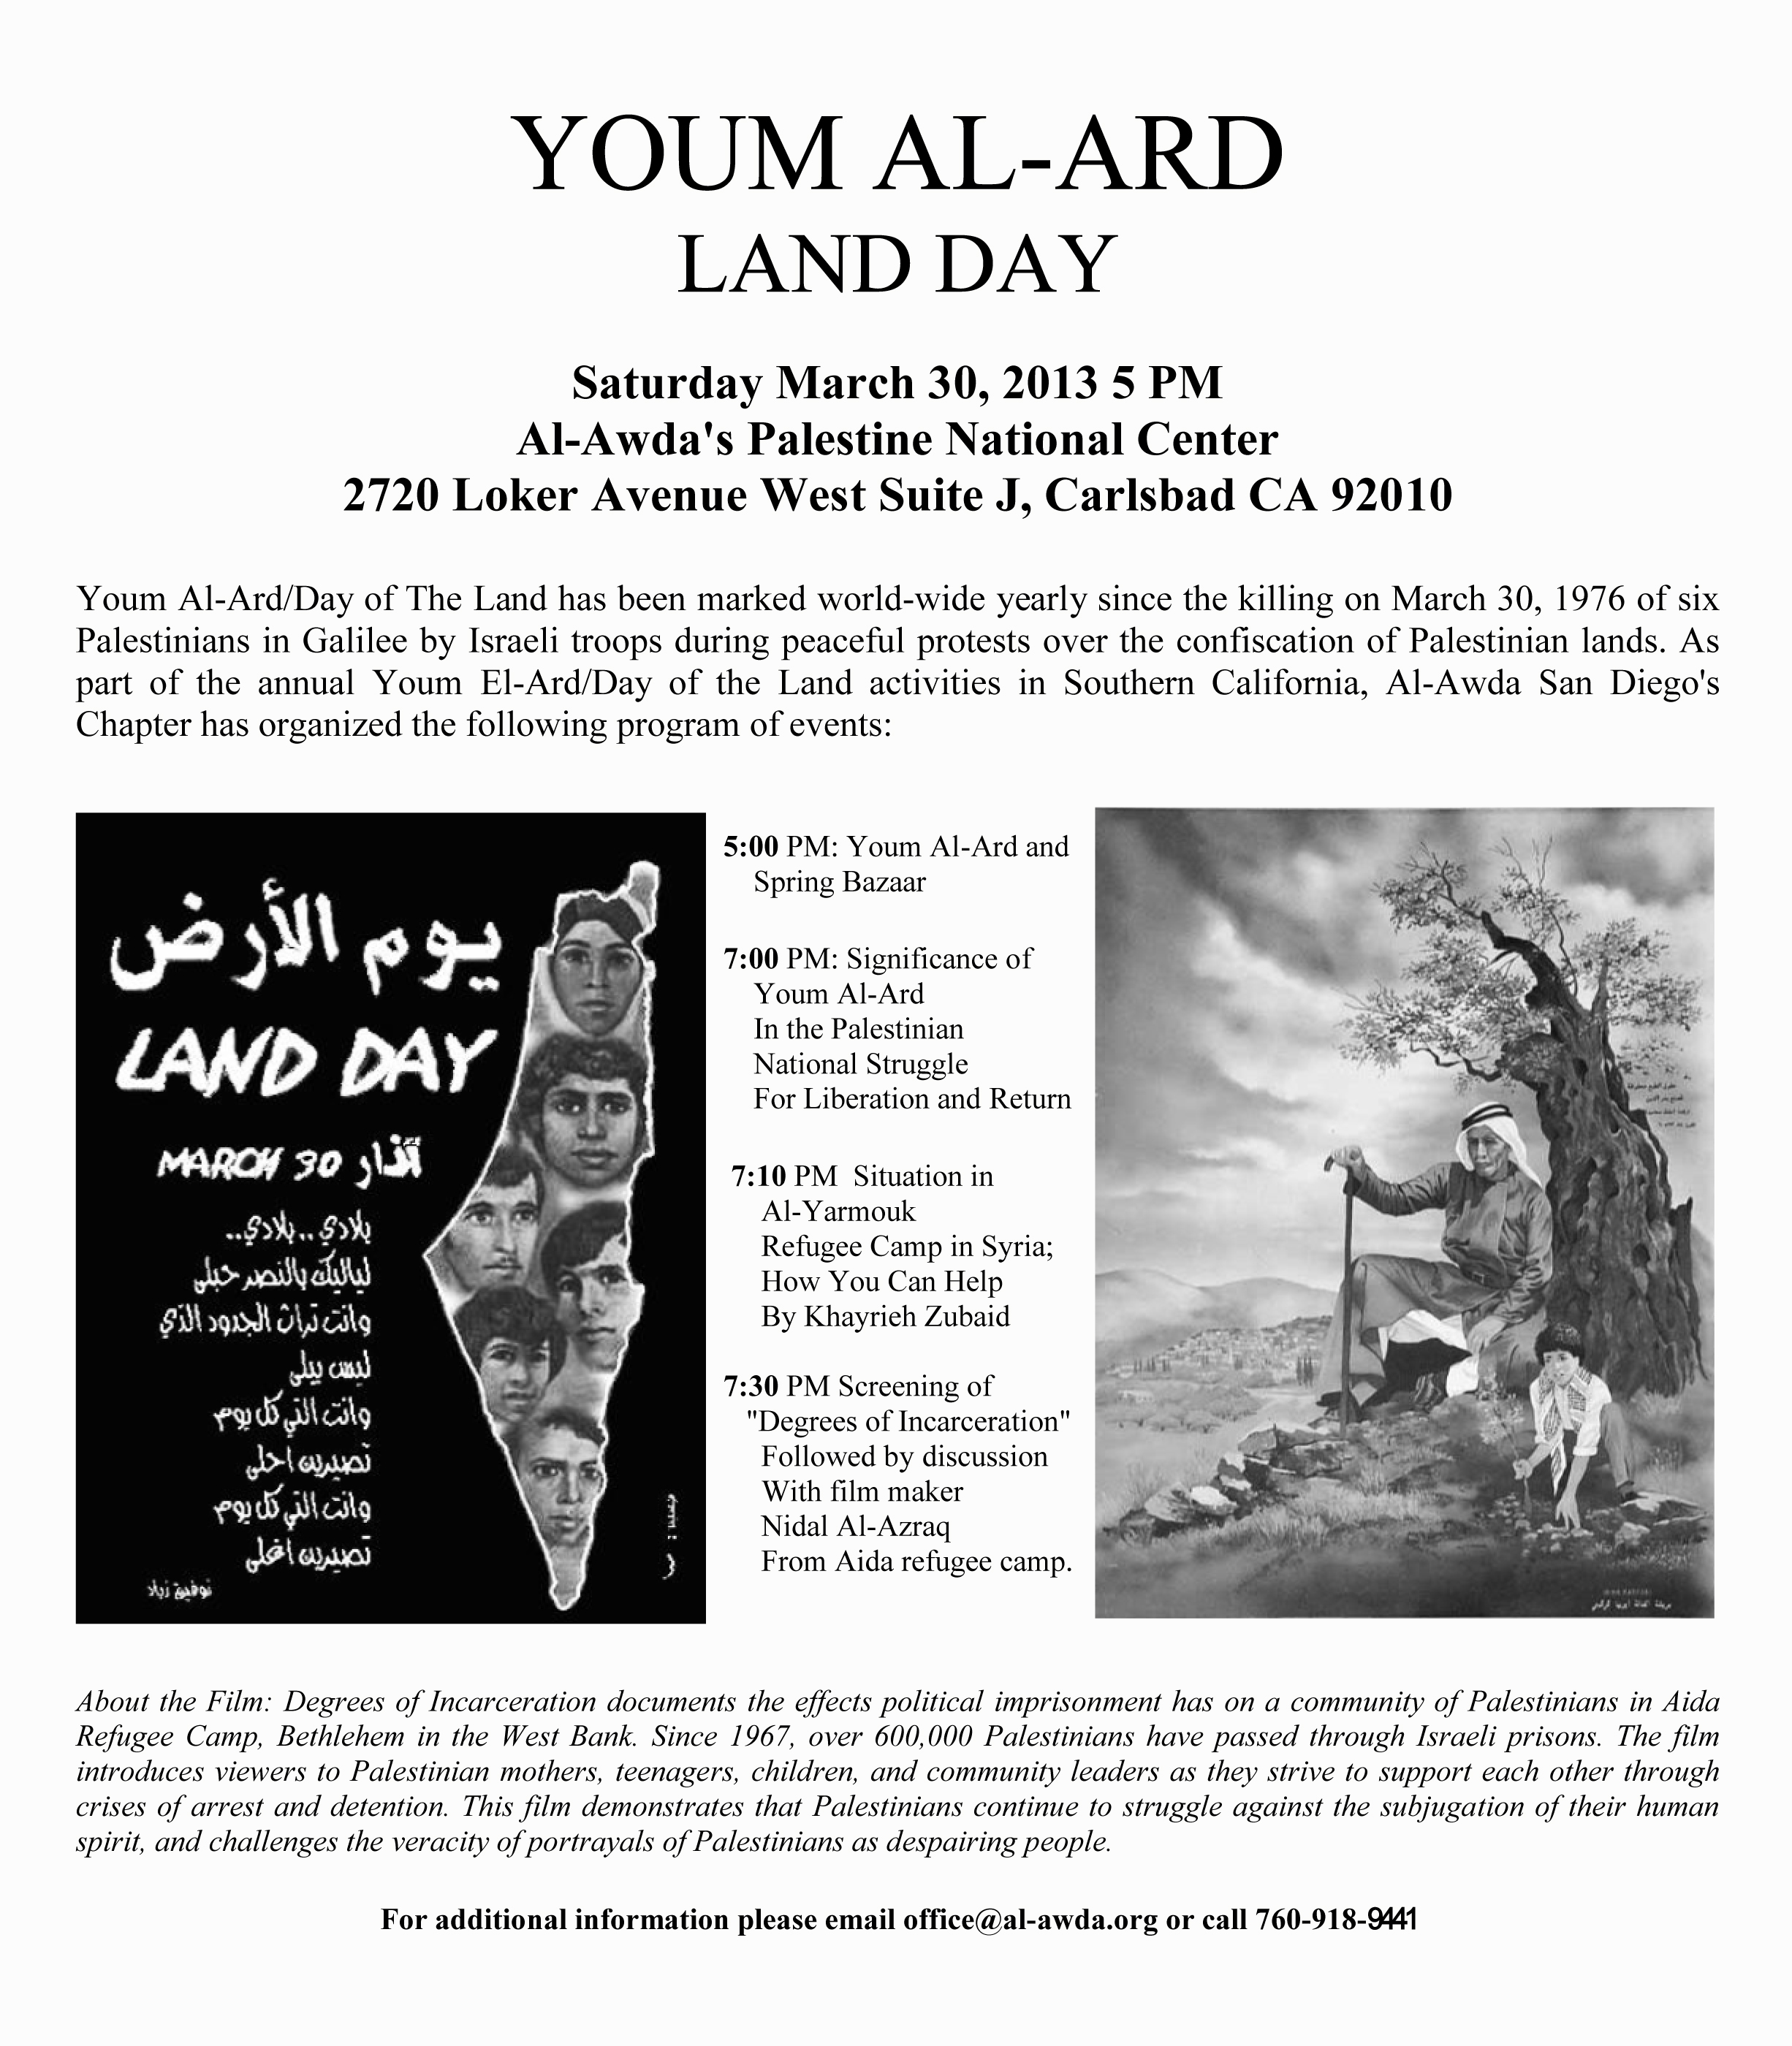 Youm Al-Ard/Day of the Land